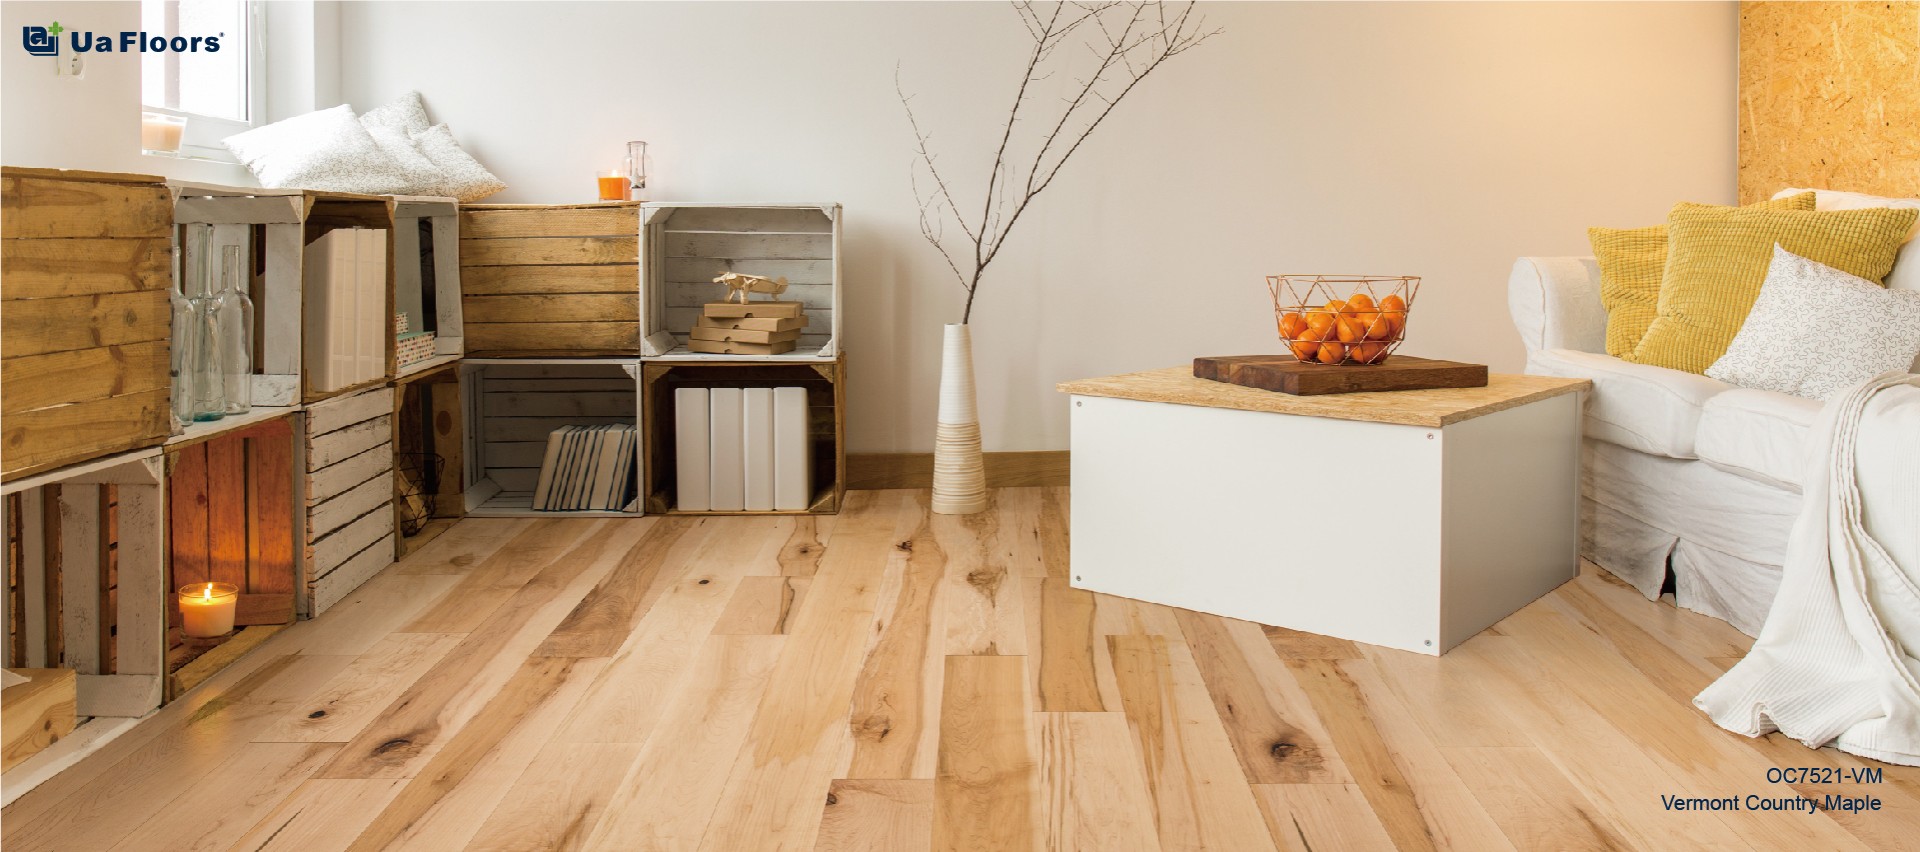 Stylish And Durable Maple Engineered, What Kind Of Hardwood Floors Should I Get